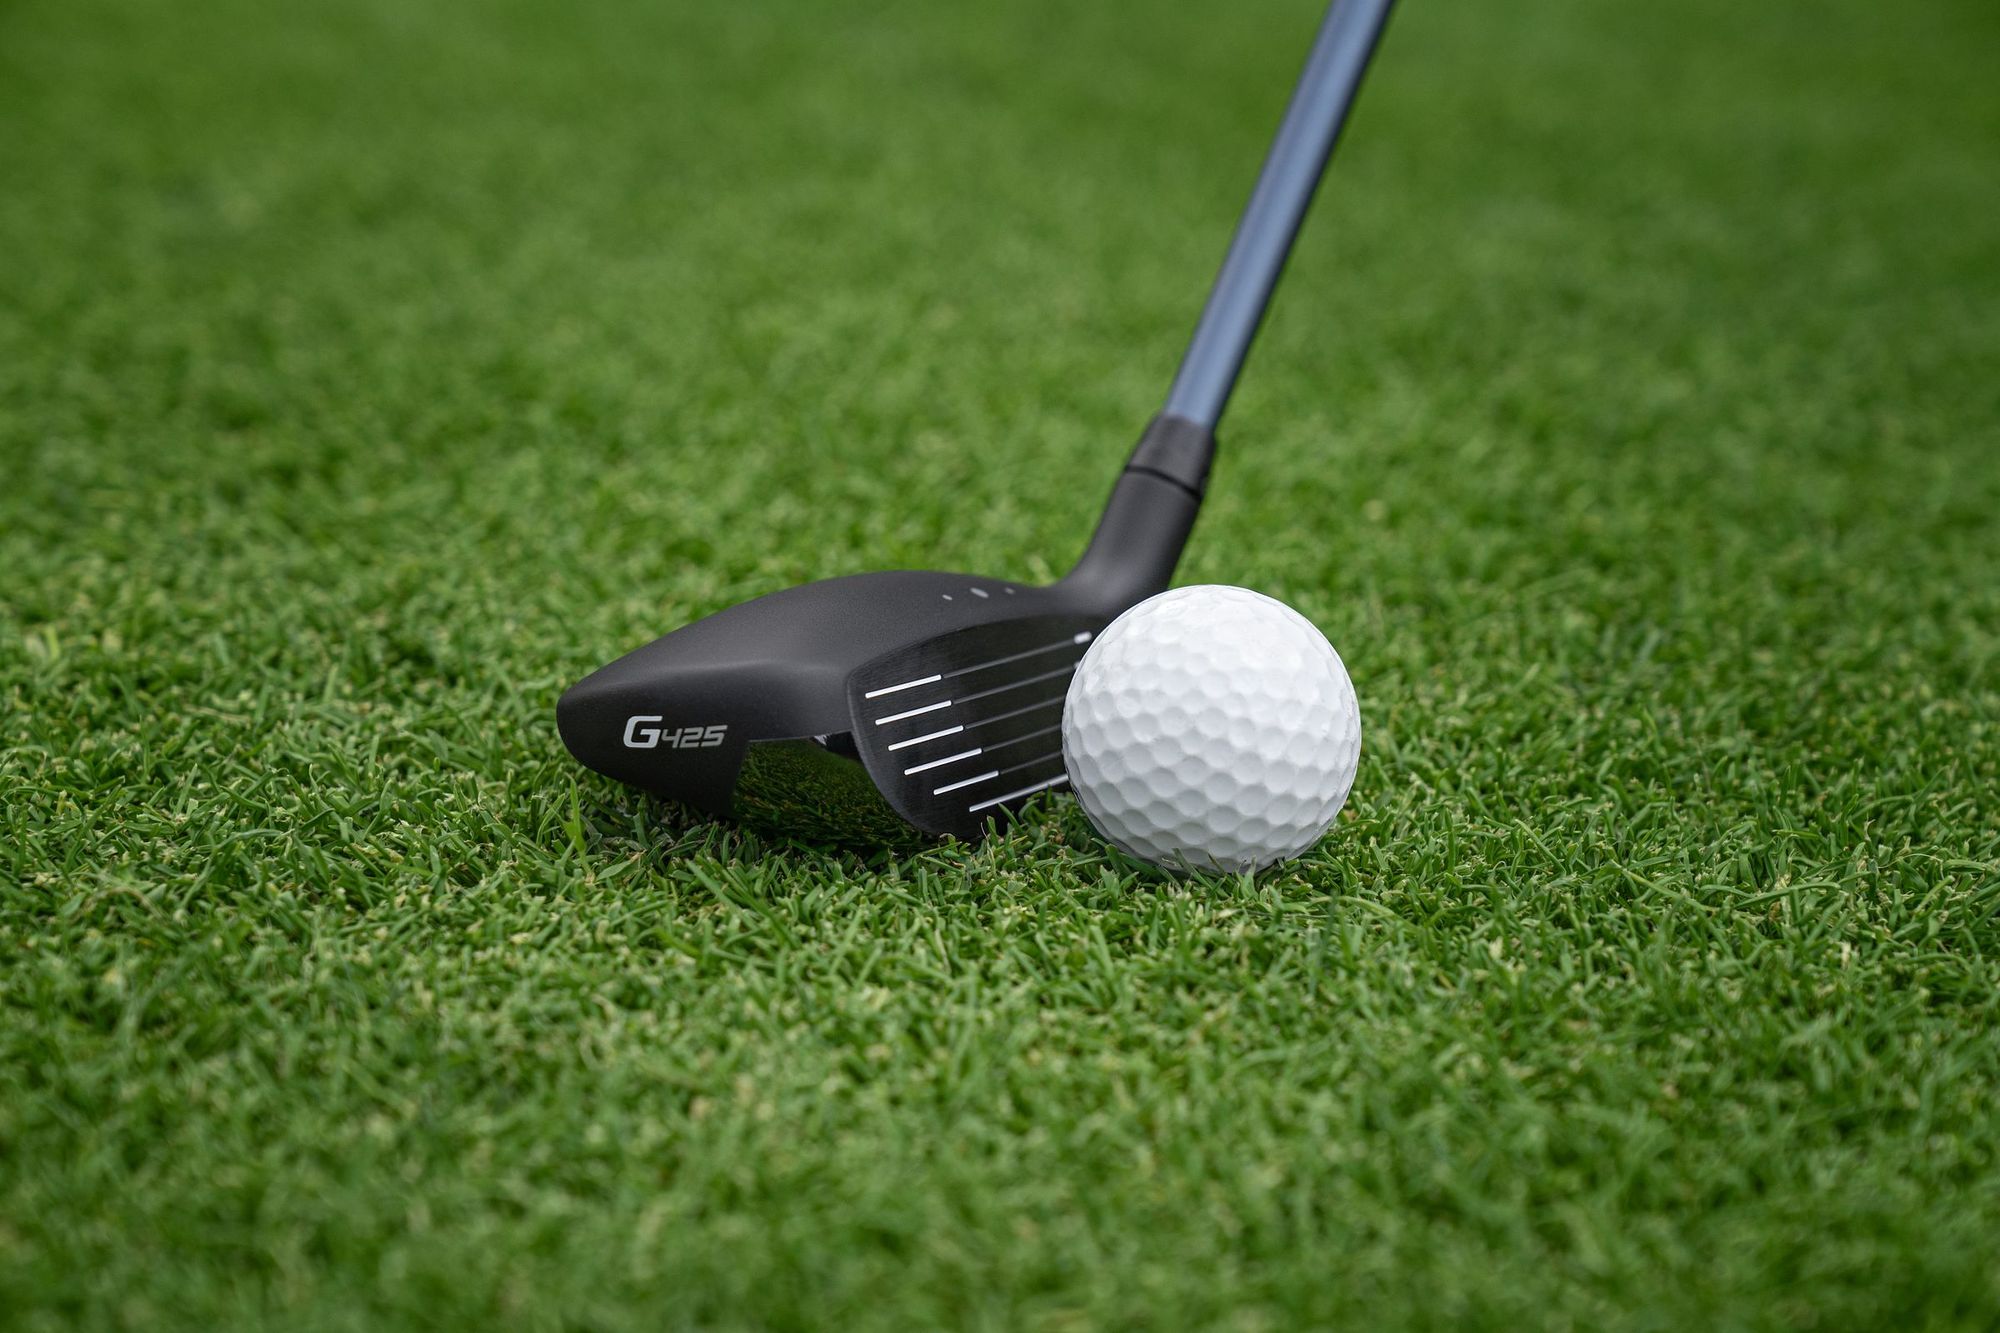 The PING G425 is a more premium club that offers forgiveness to beginner golfers